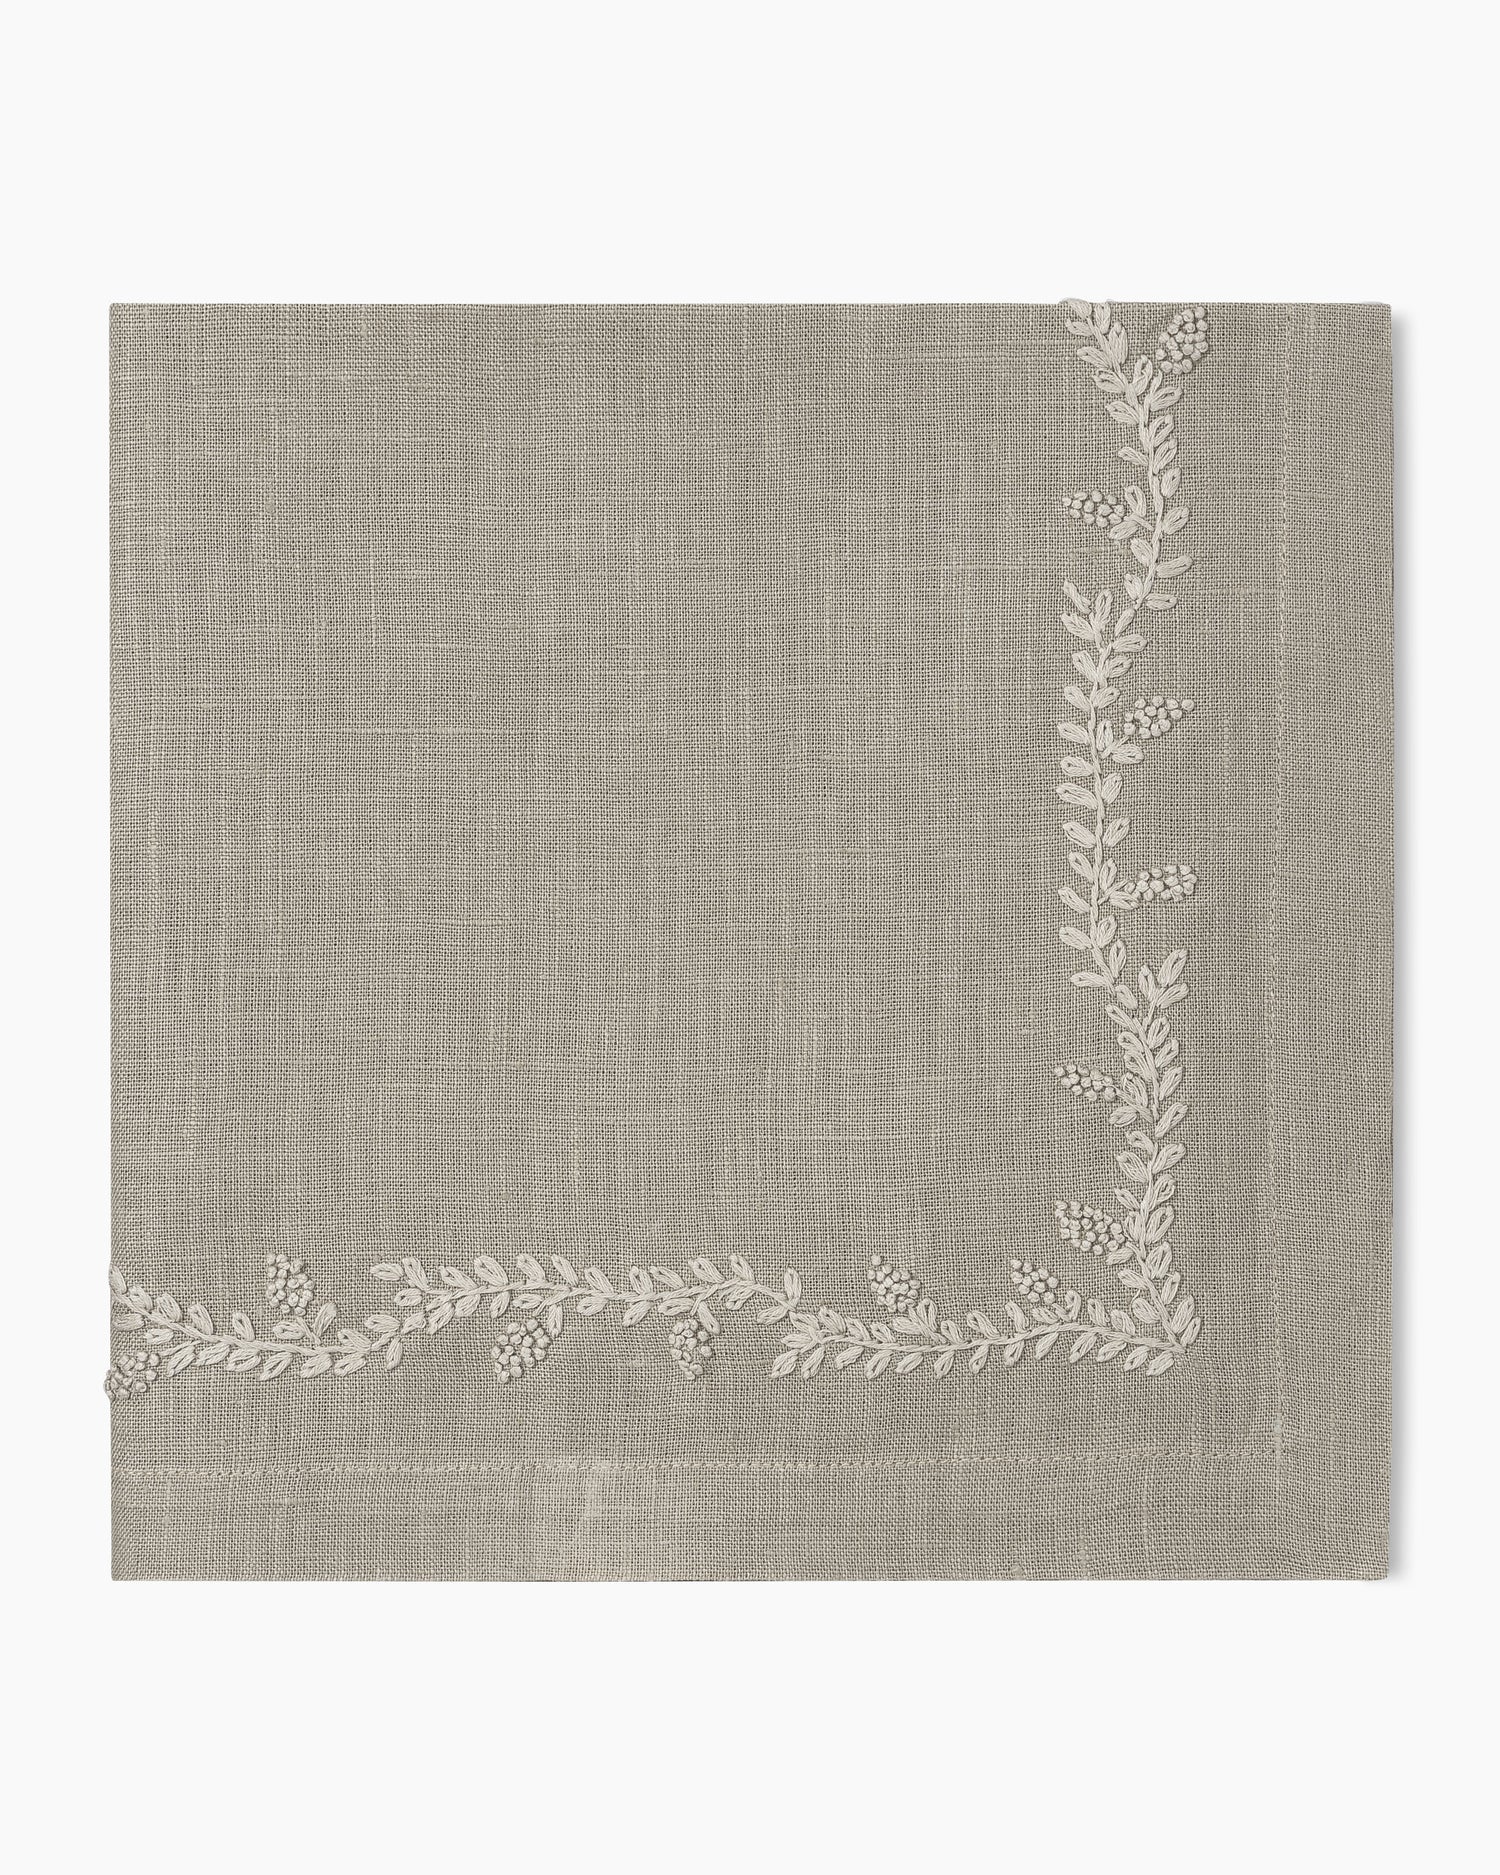 A beige Prism Vine Linen Dinner Napkin - 13 Colors with white embroidered leaves, perfect for table linens.